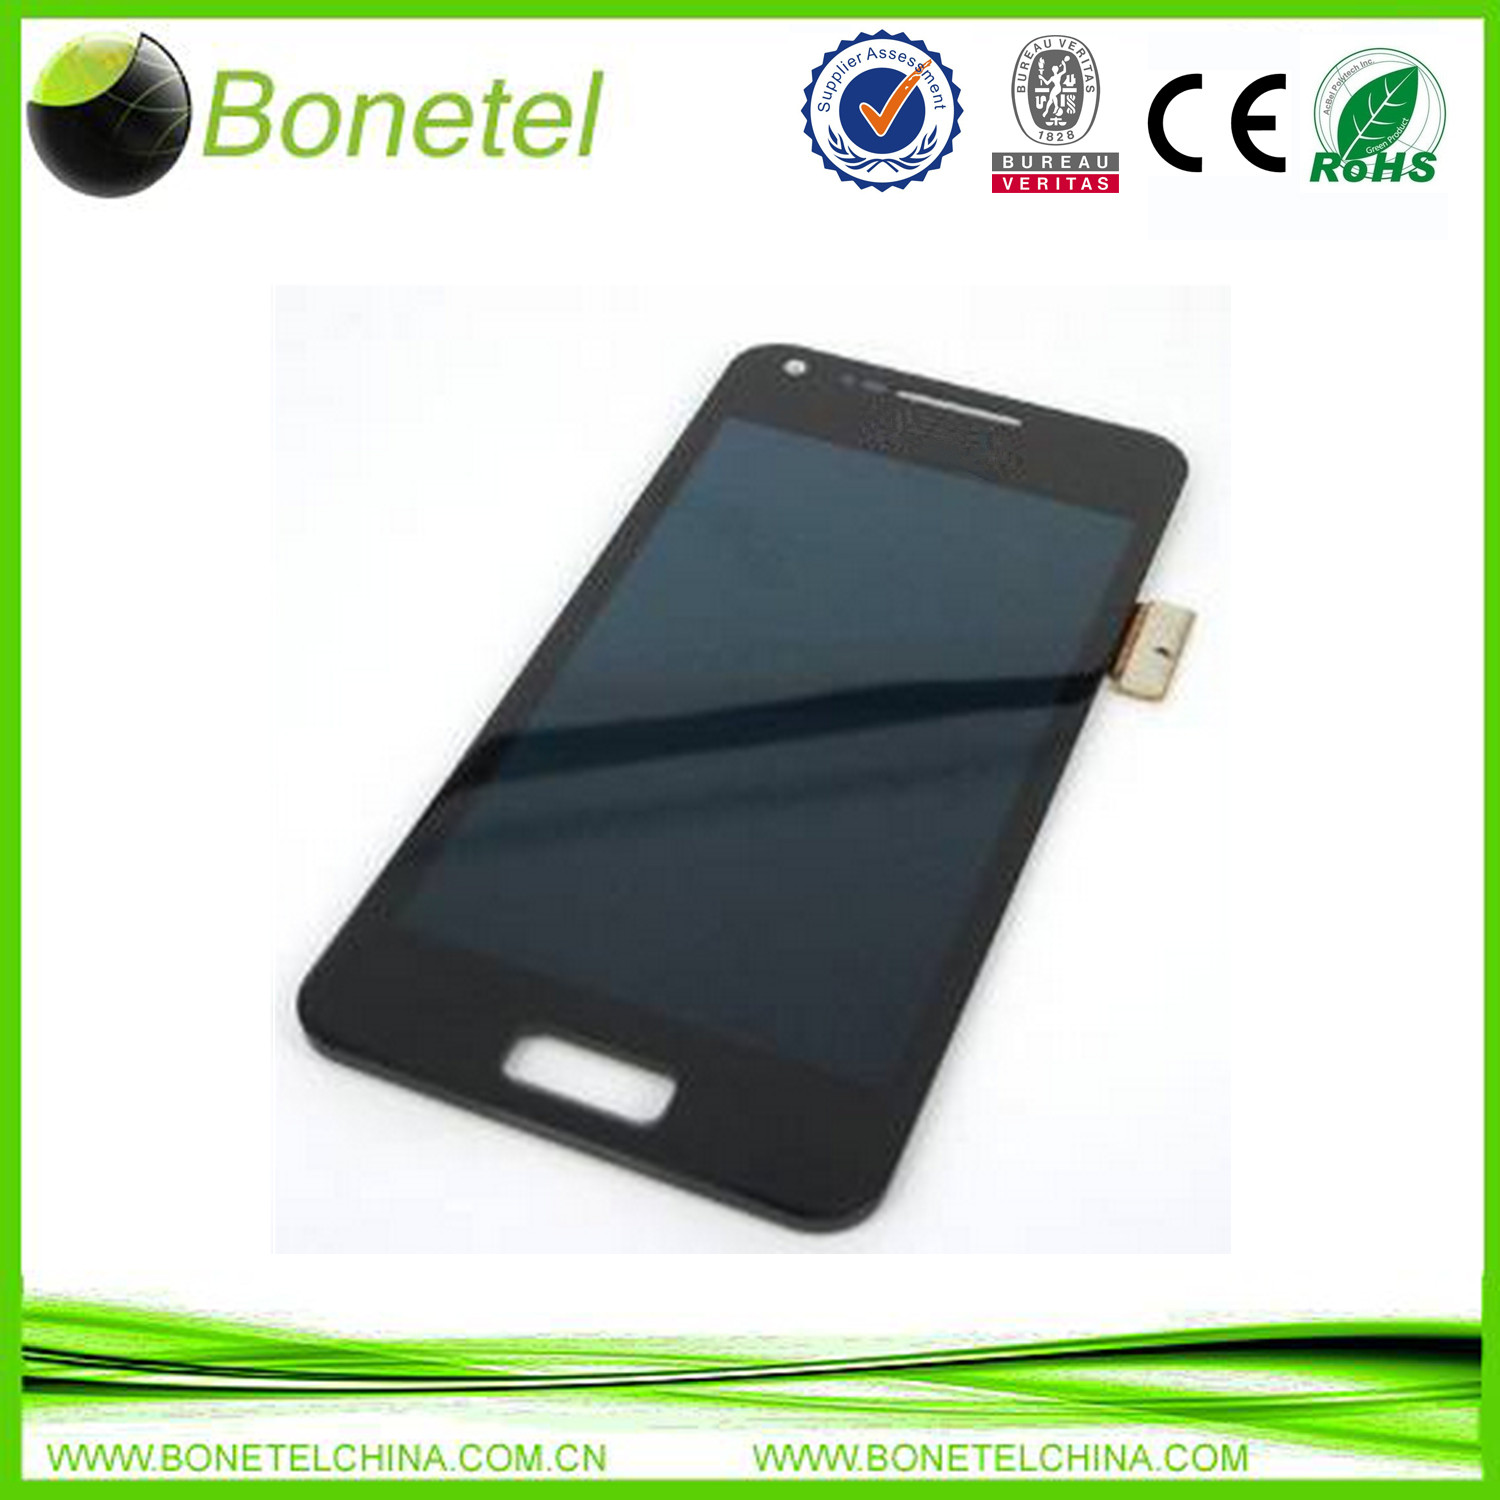 Generic Full Lcd Display Touch Digitizer Glass Compatible For Samsung Galaxy S Advance I9070